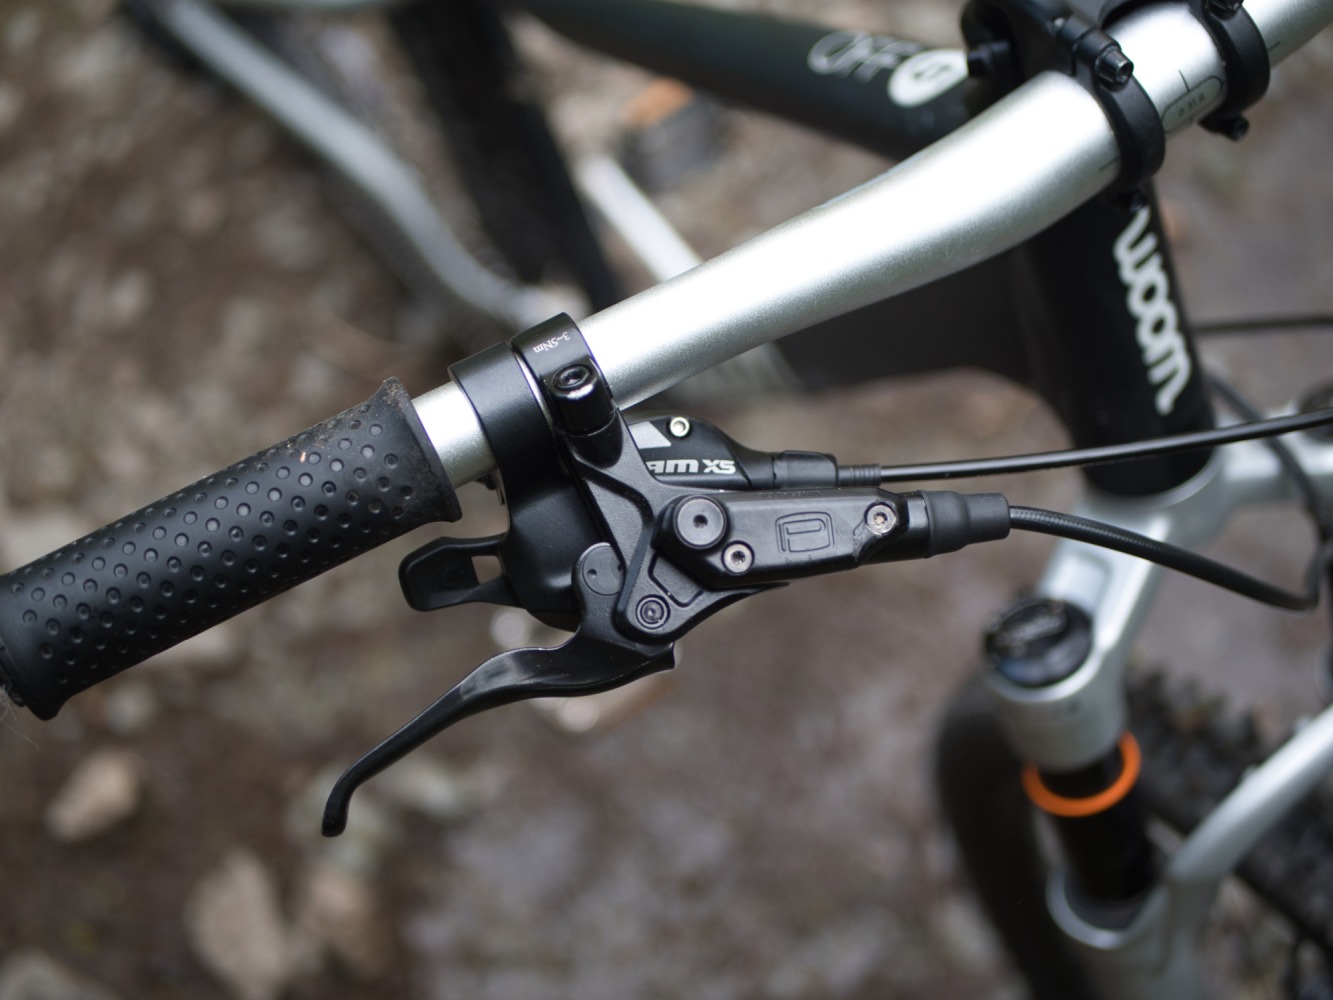 woom OFF AIR 5 review: close up shot of the woom mountain bike brake lever